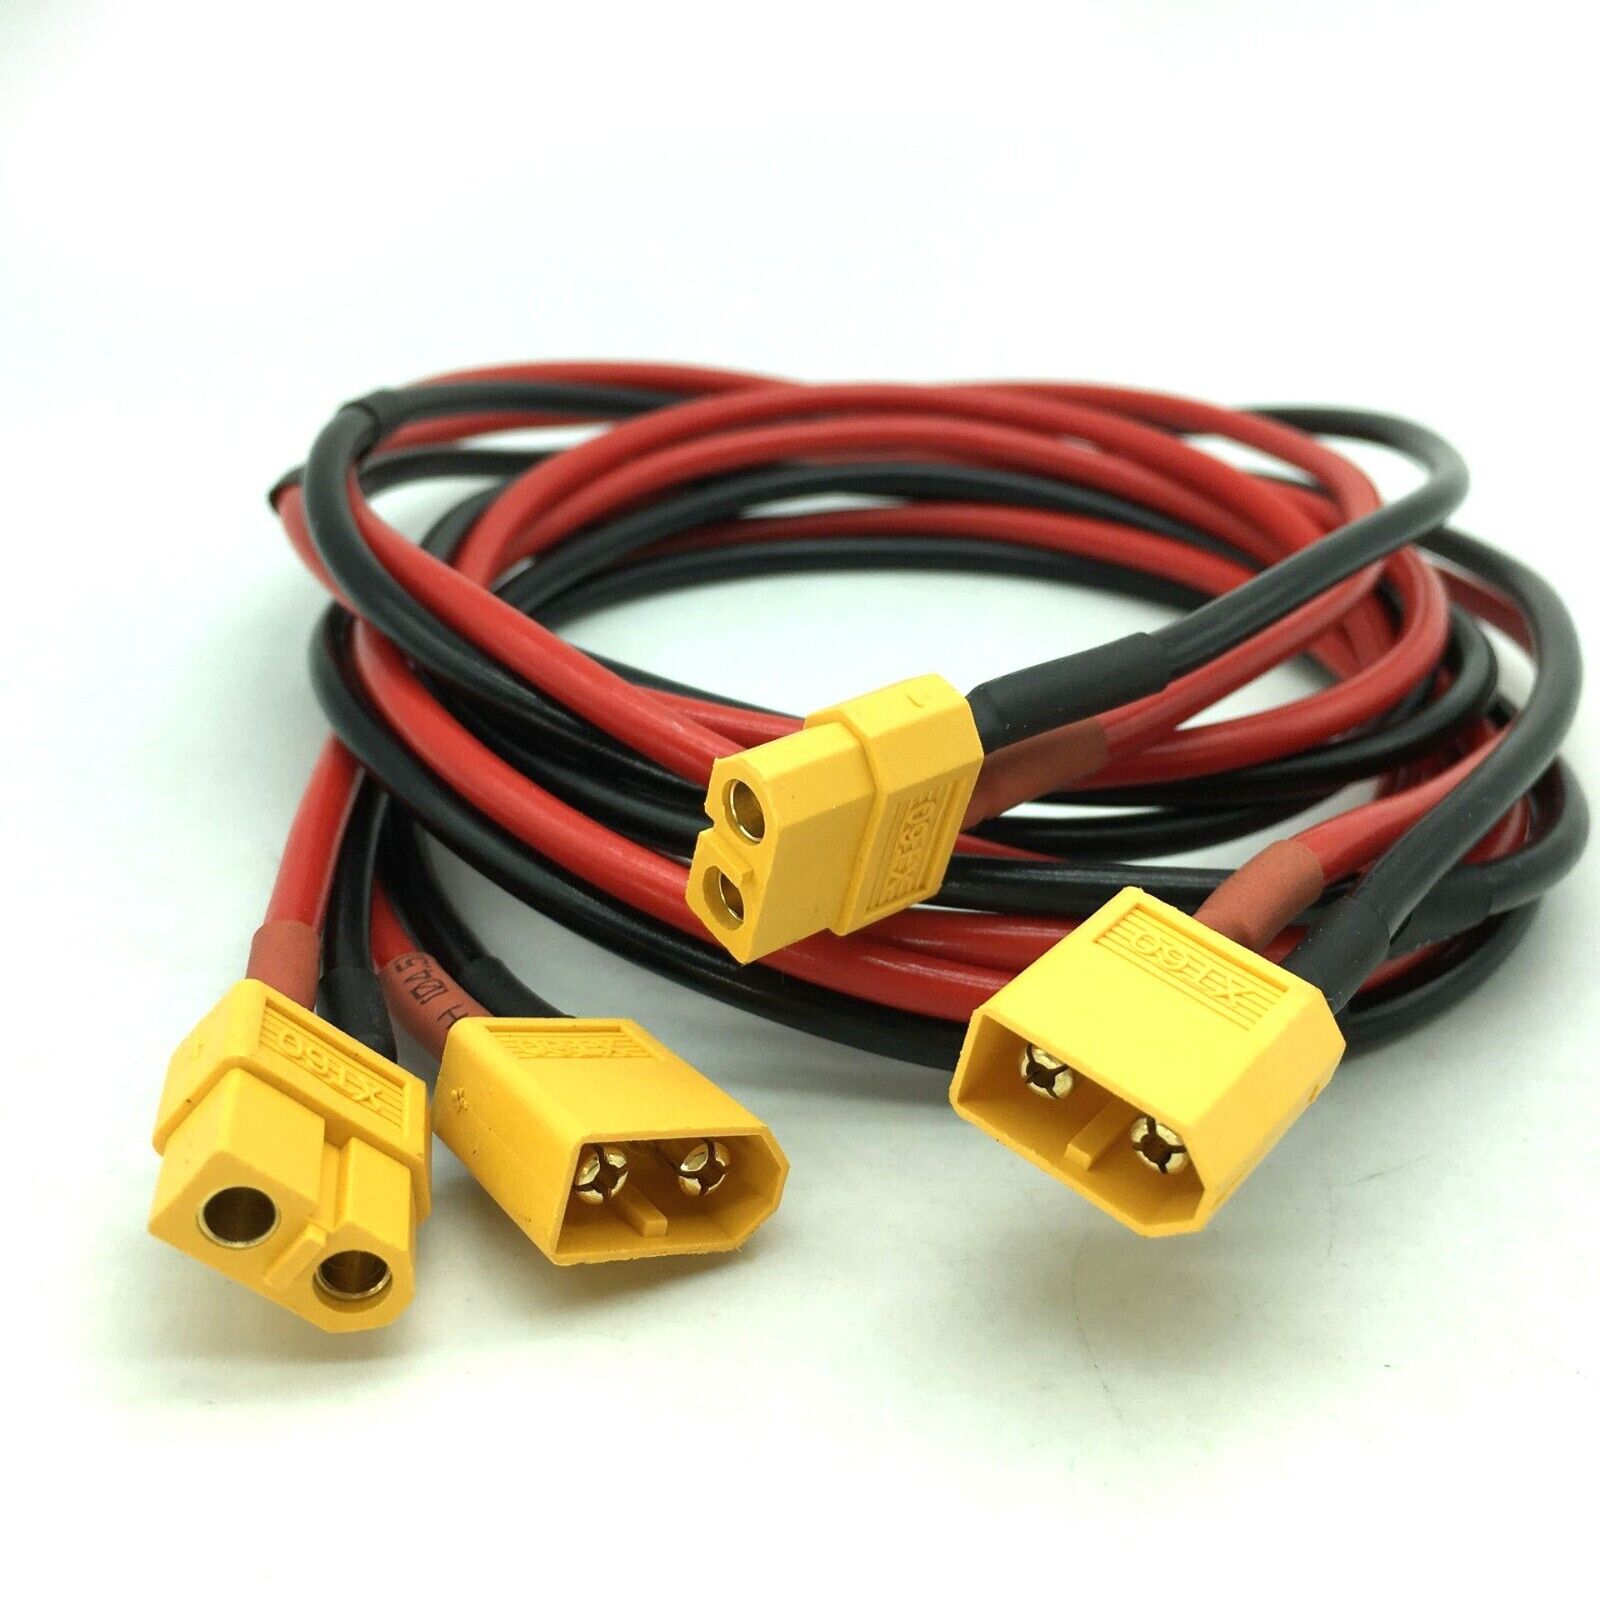 0.2m 0.3m 0.5m 1m Male to XT-60 Female Plug Extension Cable Lead PVC Wire 14AWG